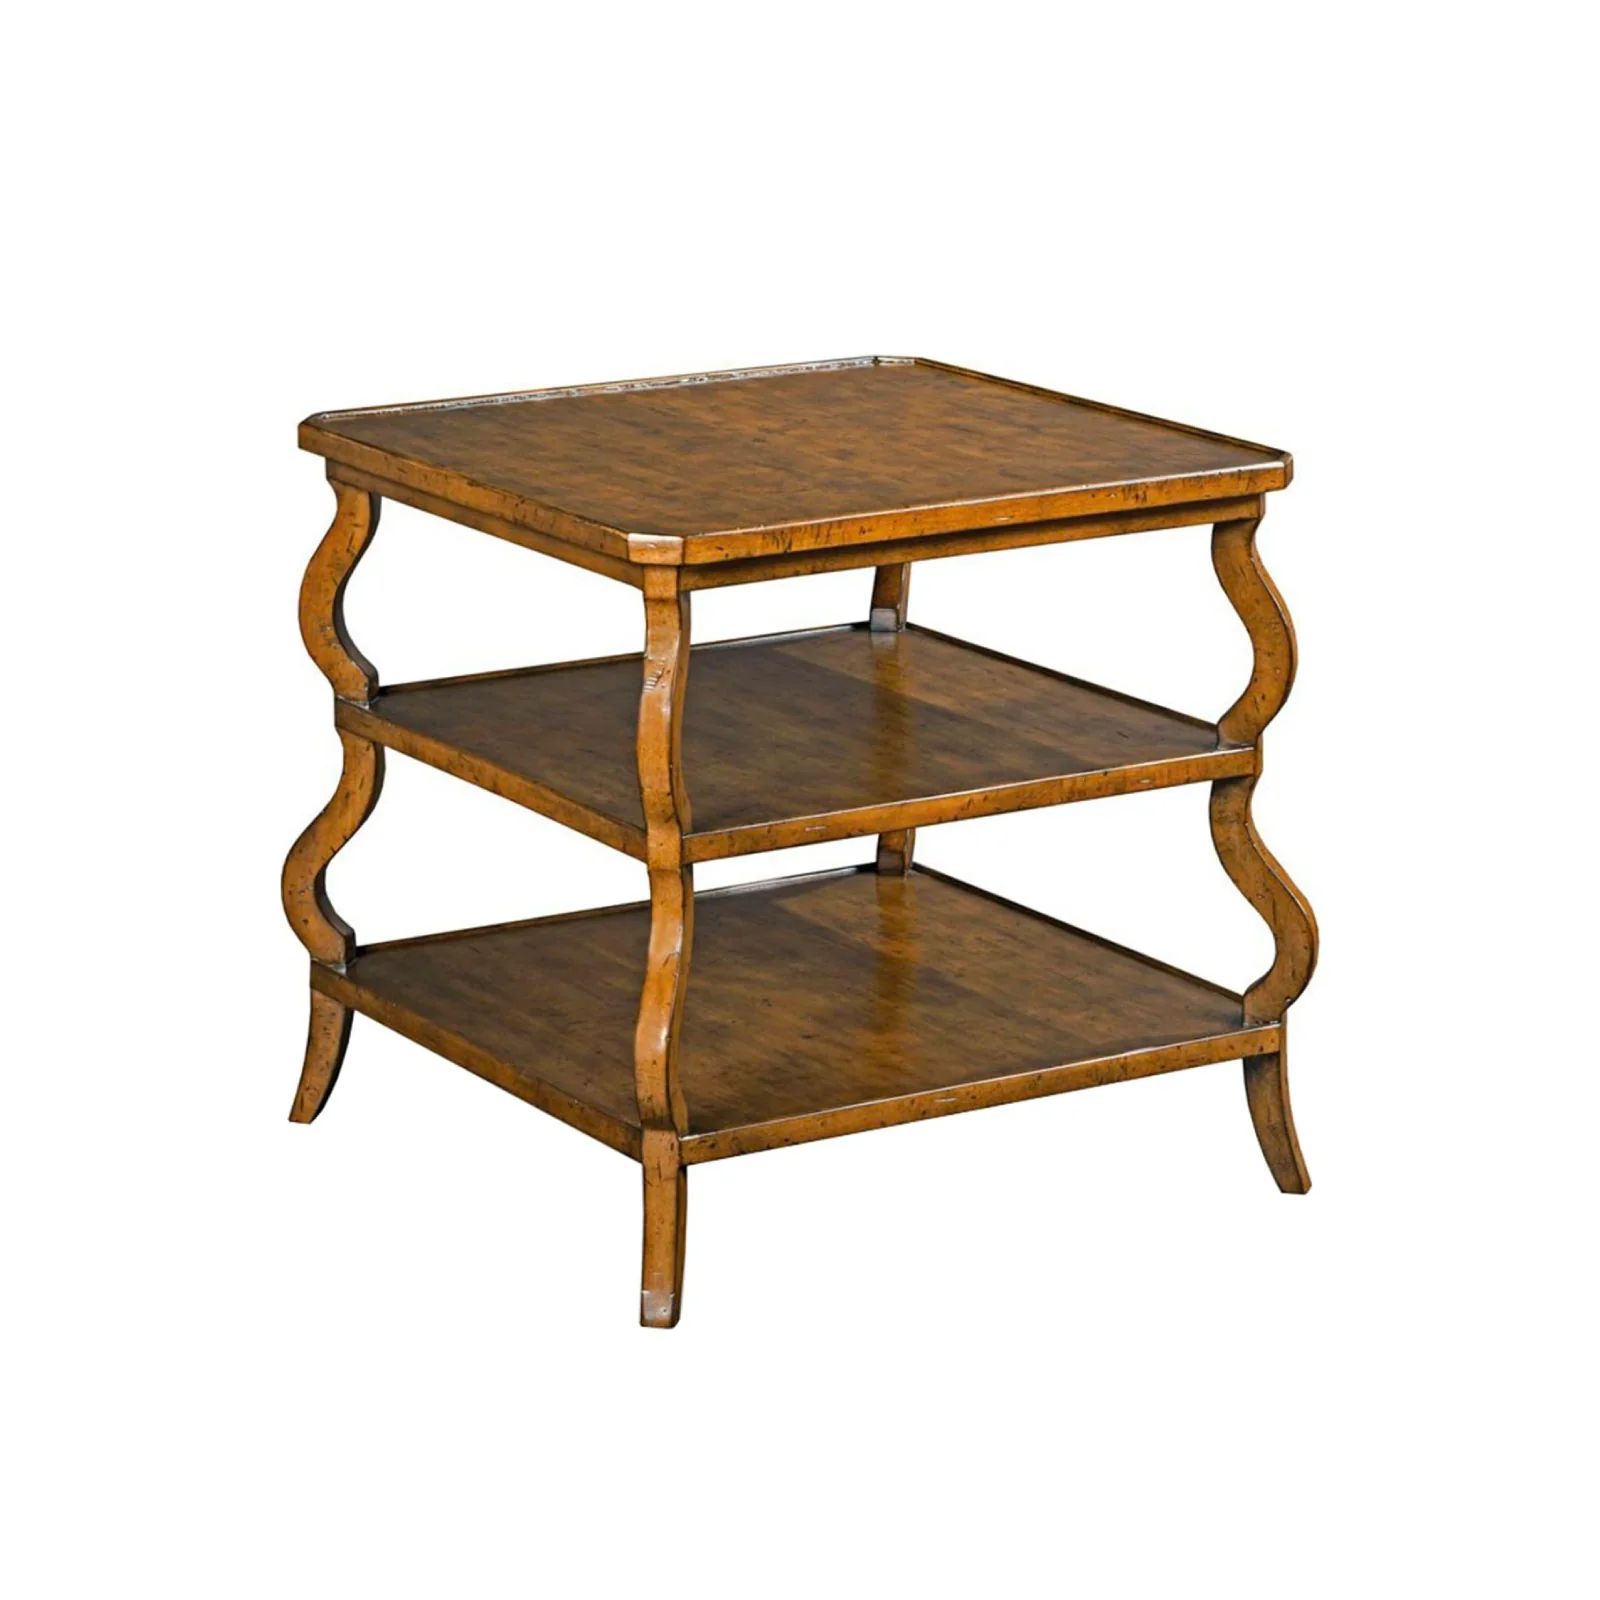 Abiline Tiered Side Table | Brooke and Lou